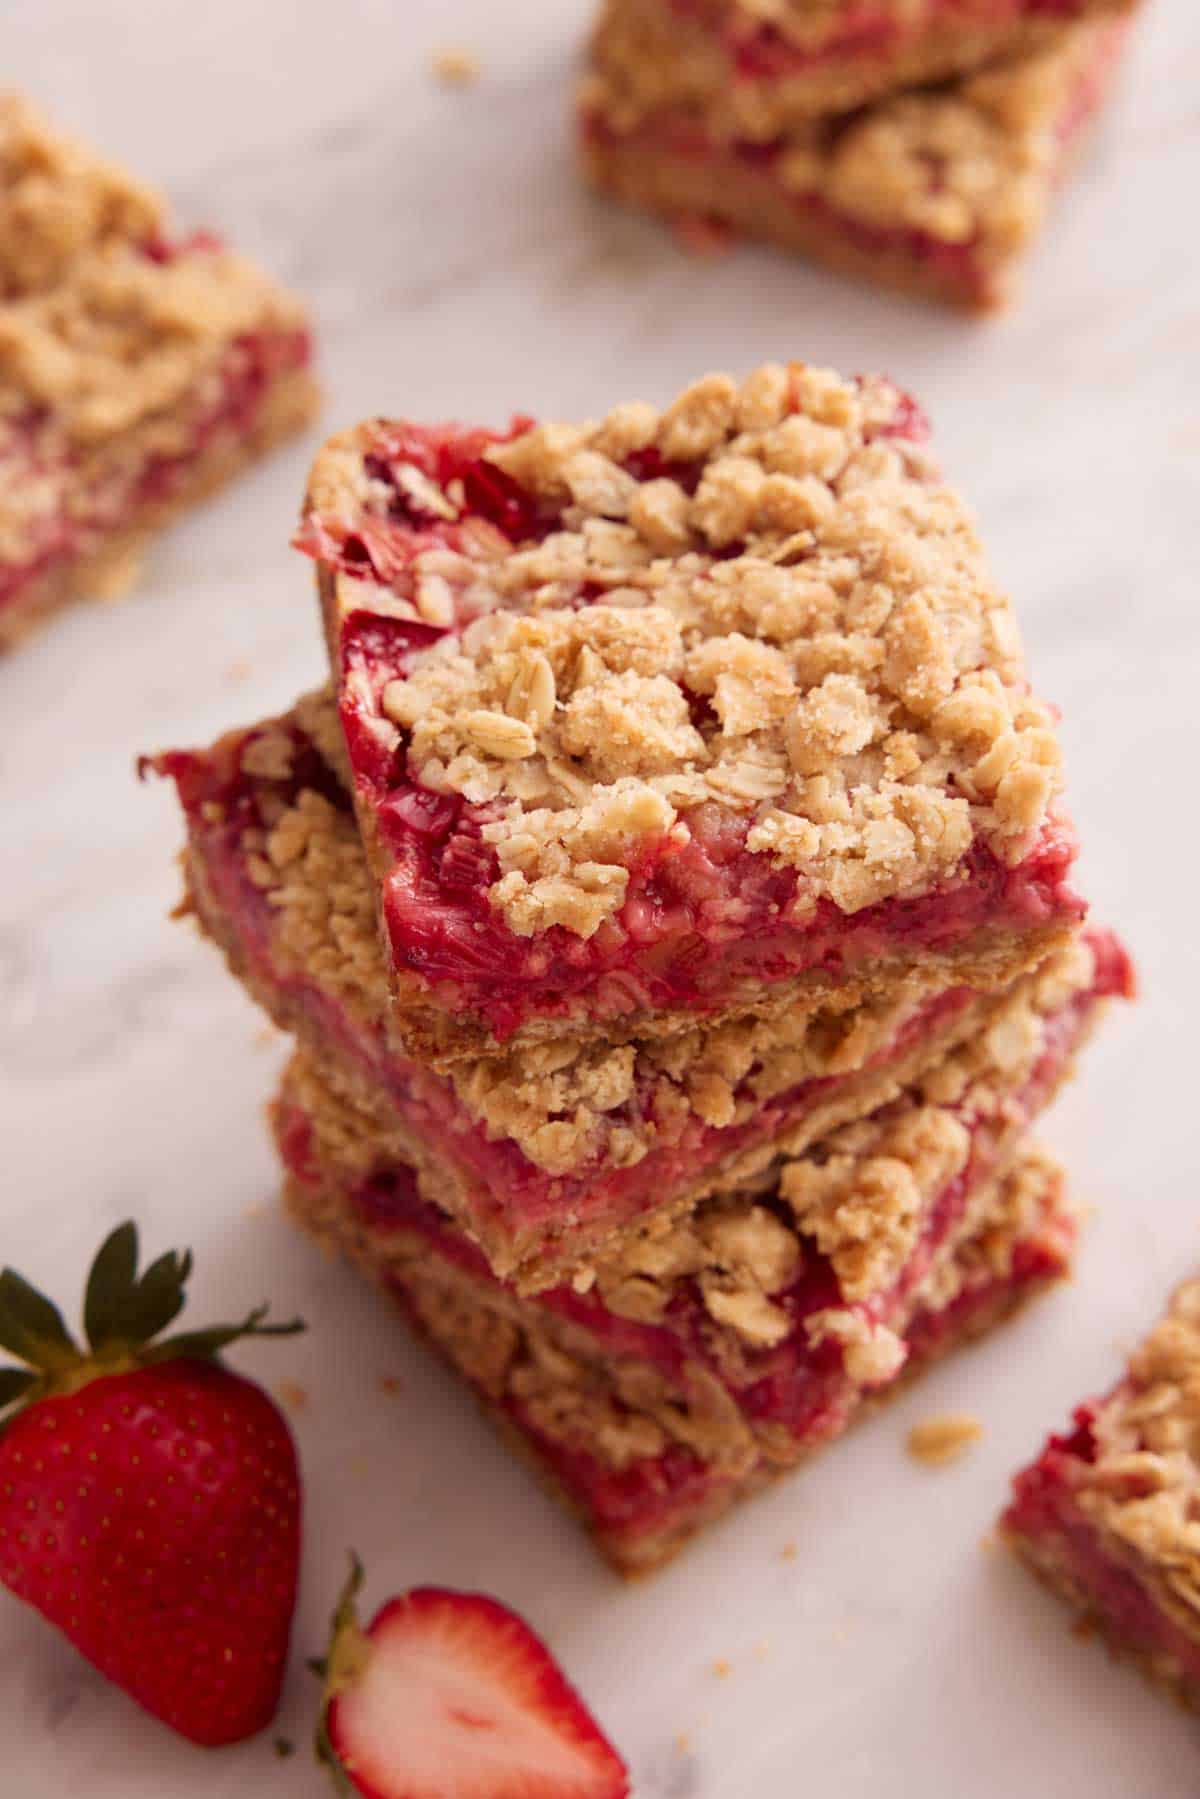 A stack of four strawberry rhubarb bars with more scattered around it and a strawberry beside it.